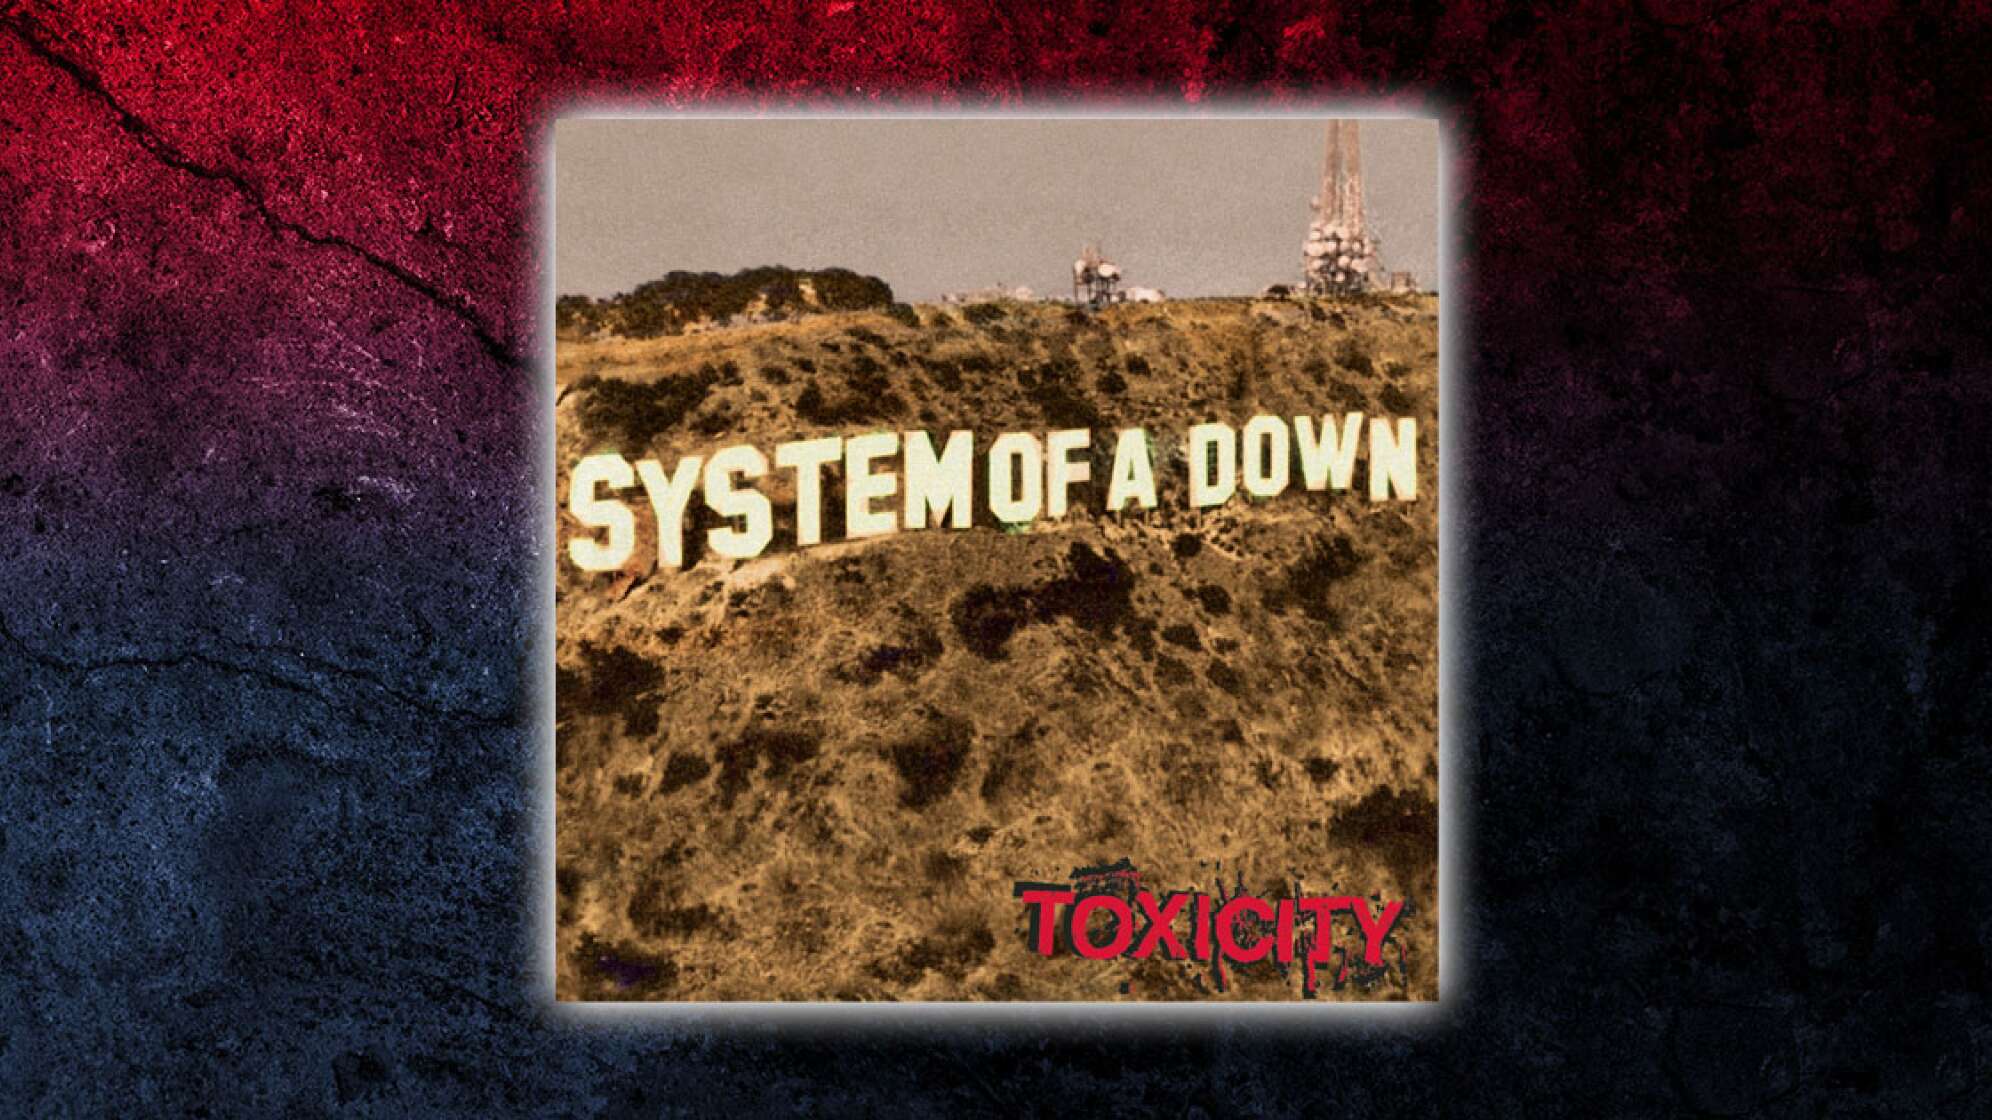 Albumcover von System Of A Down Toxicity